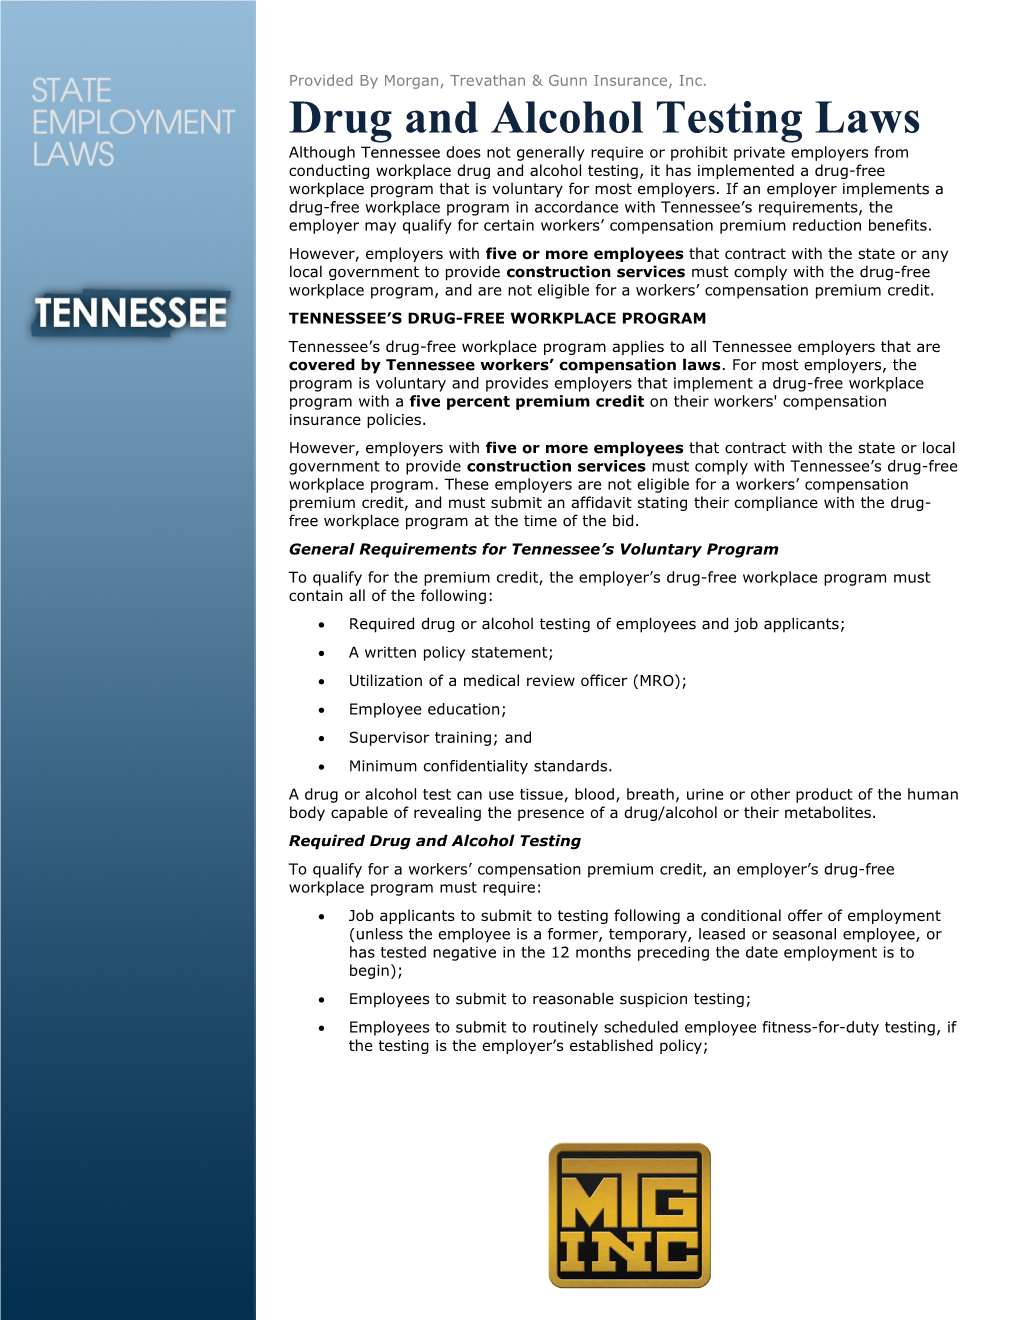 Tennessee S Drug-Free Workplace Program